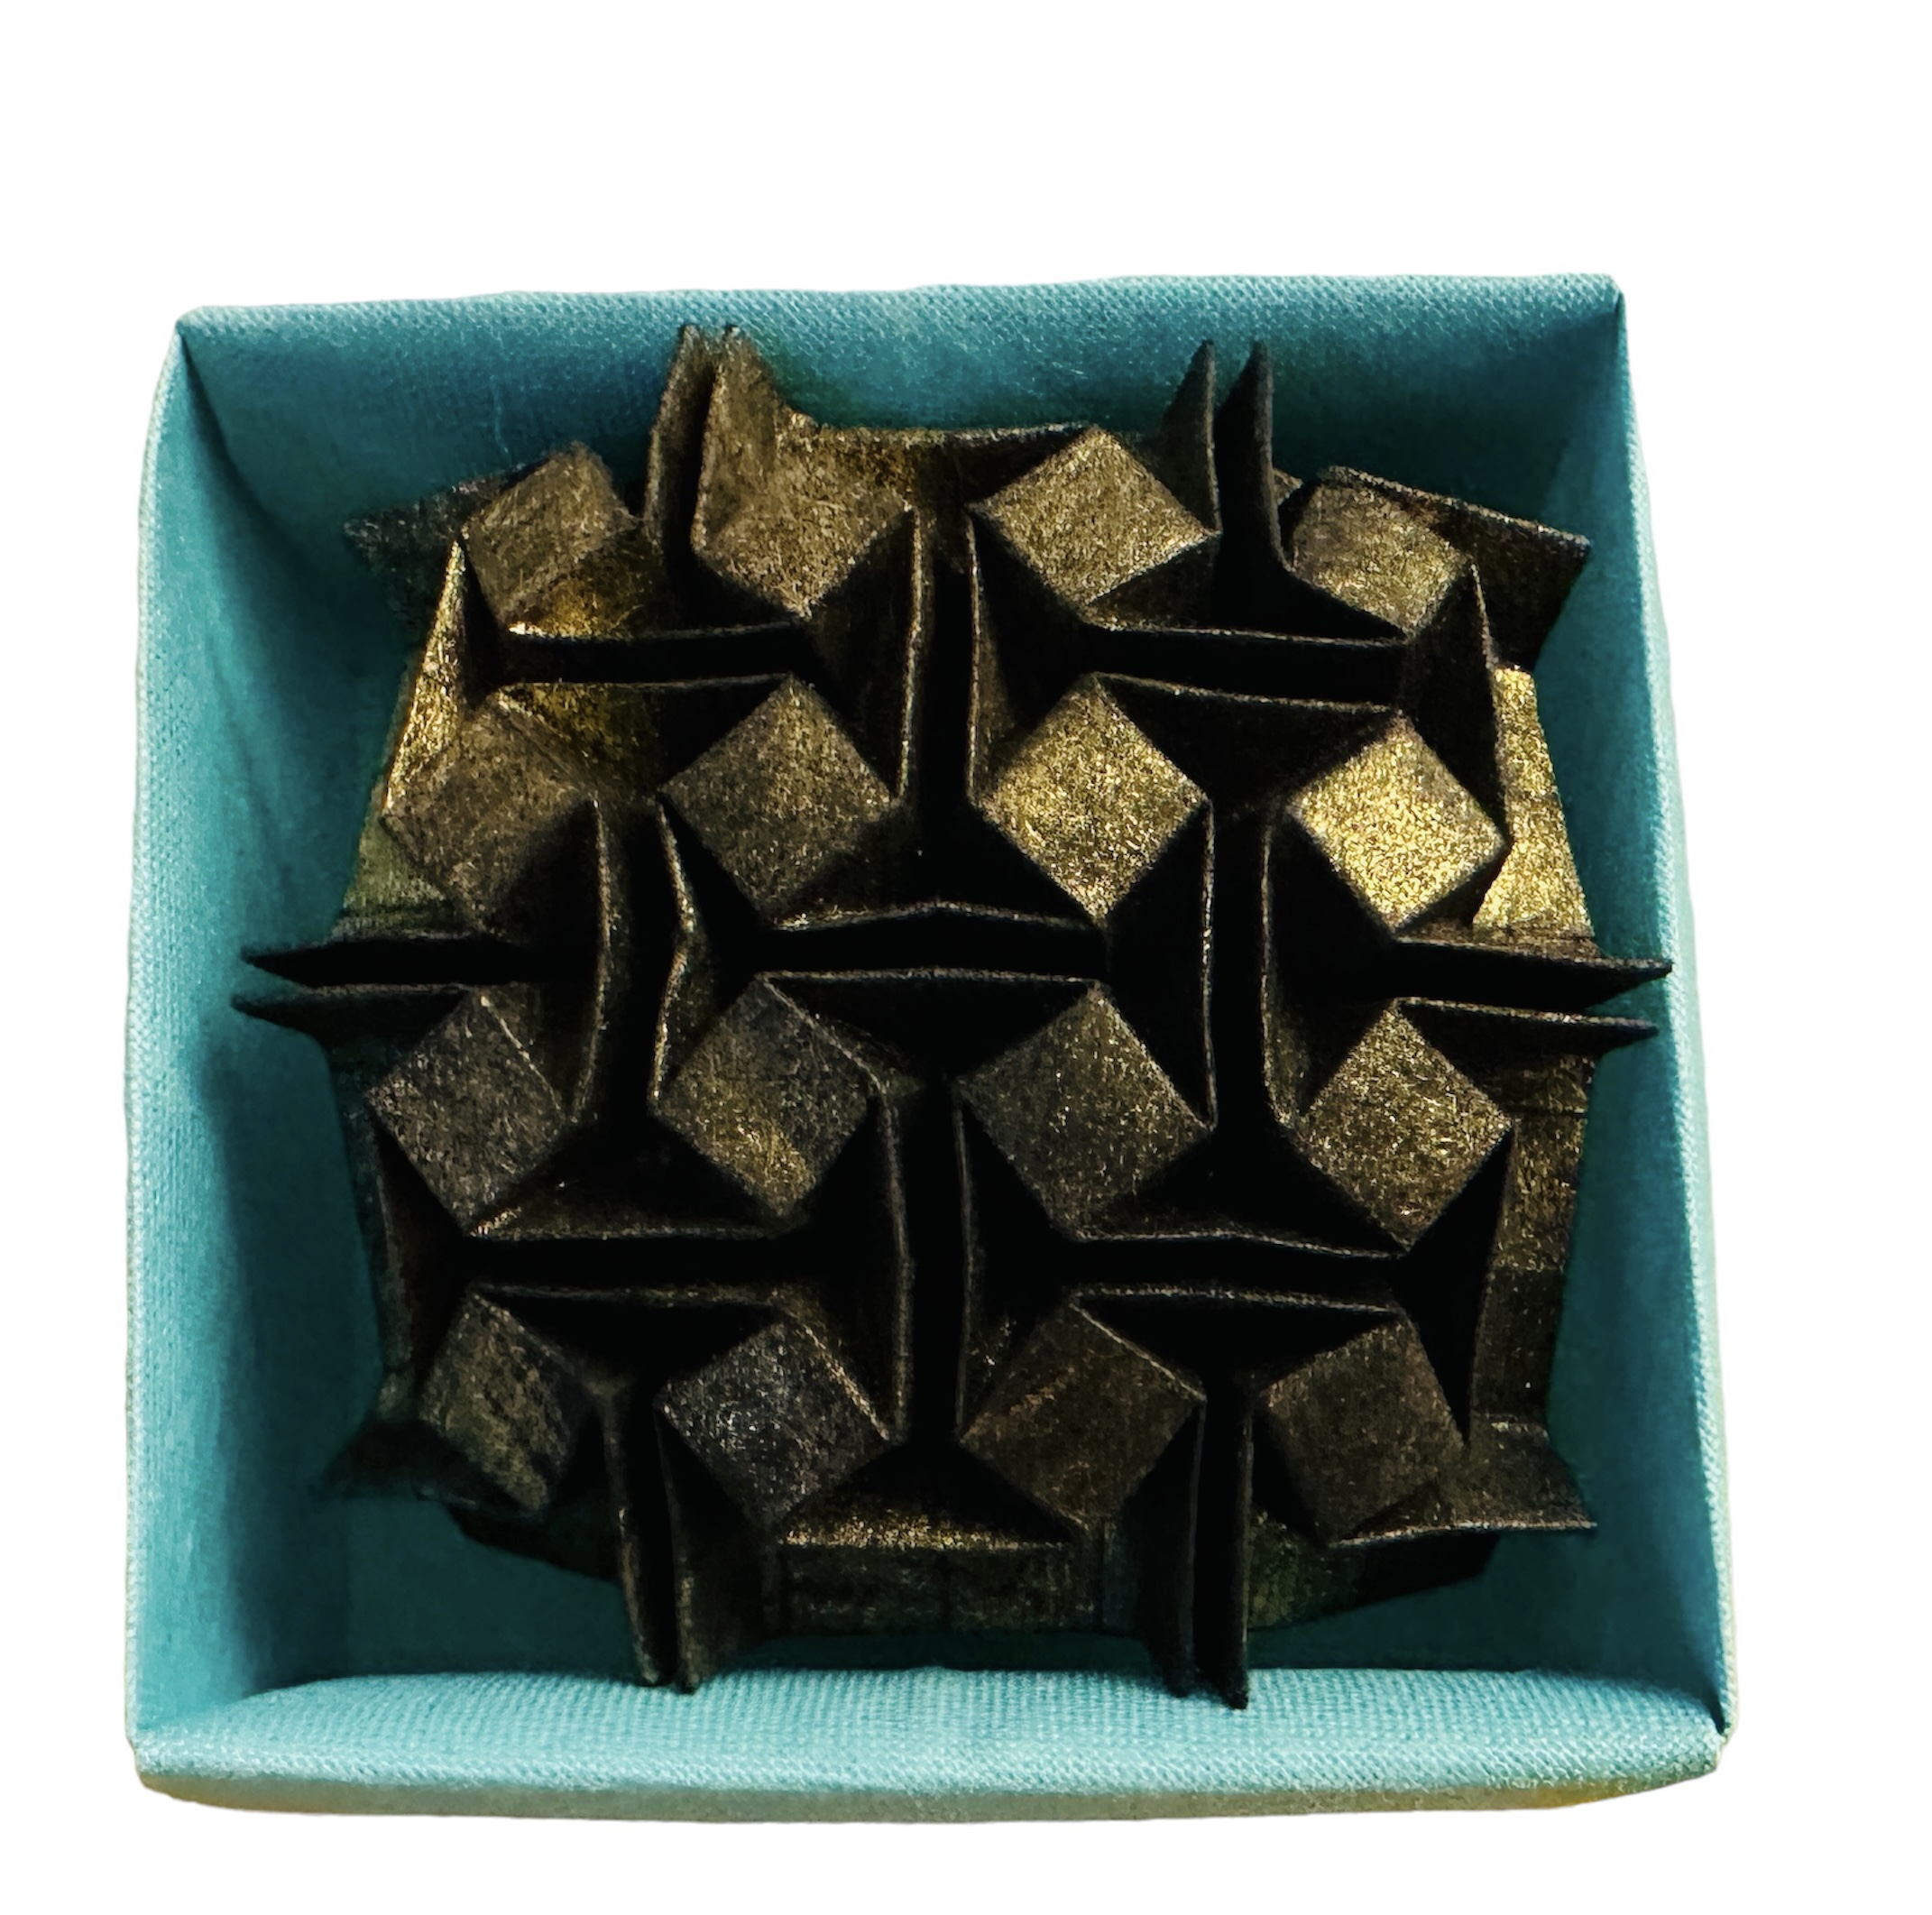 2023/03/29(Wed) 16:08「Cube (4 by4)」Olga Mittermayer 
（創作者 Author：Ilan Garibi,　製作者 Folder：Olga Mittermayer,　出典 Source：Origami Tessellations for Everyone 2）
 The Paper is painted by Hand by Hilli Zenz